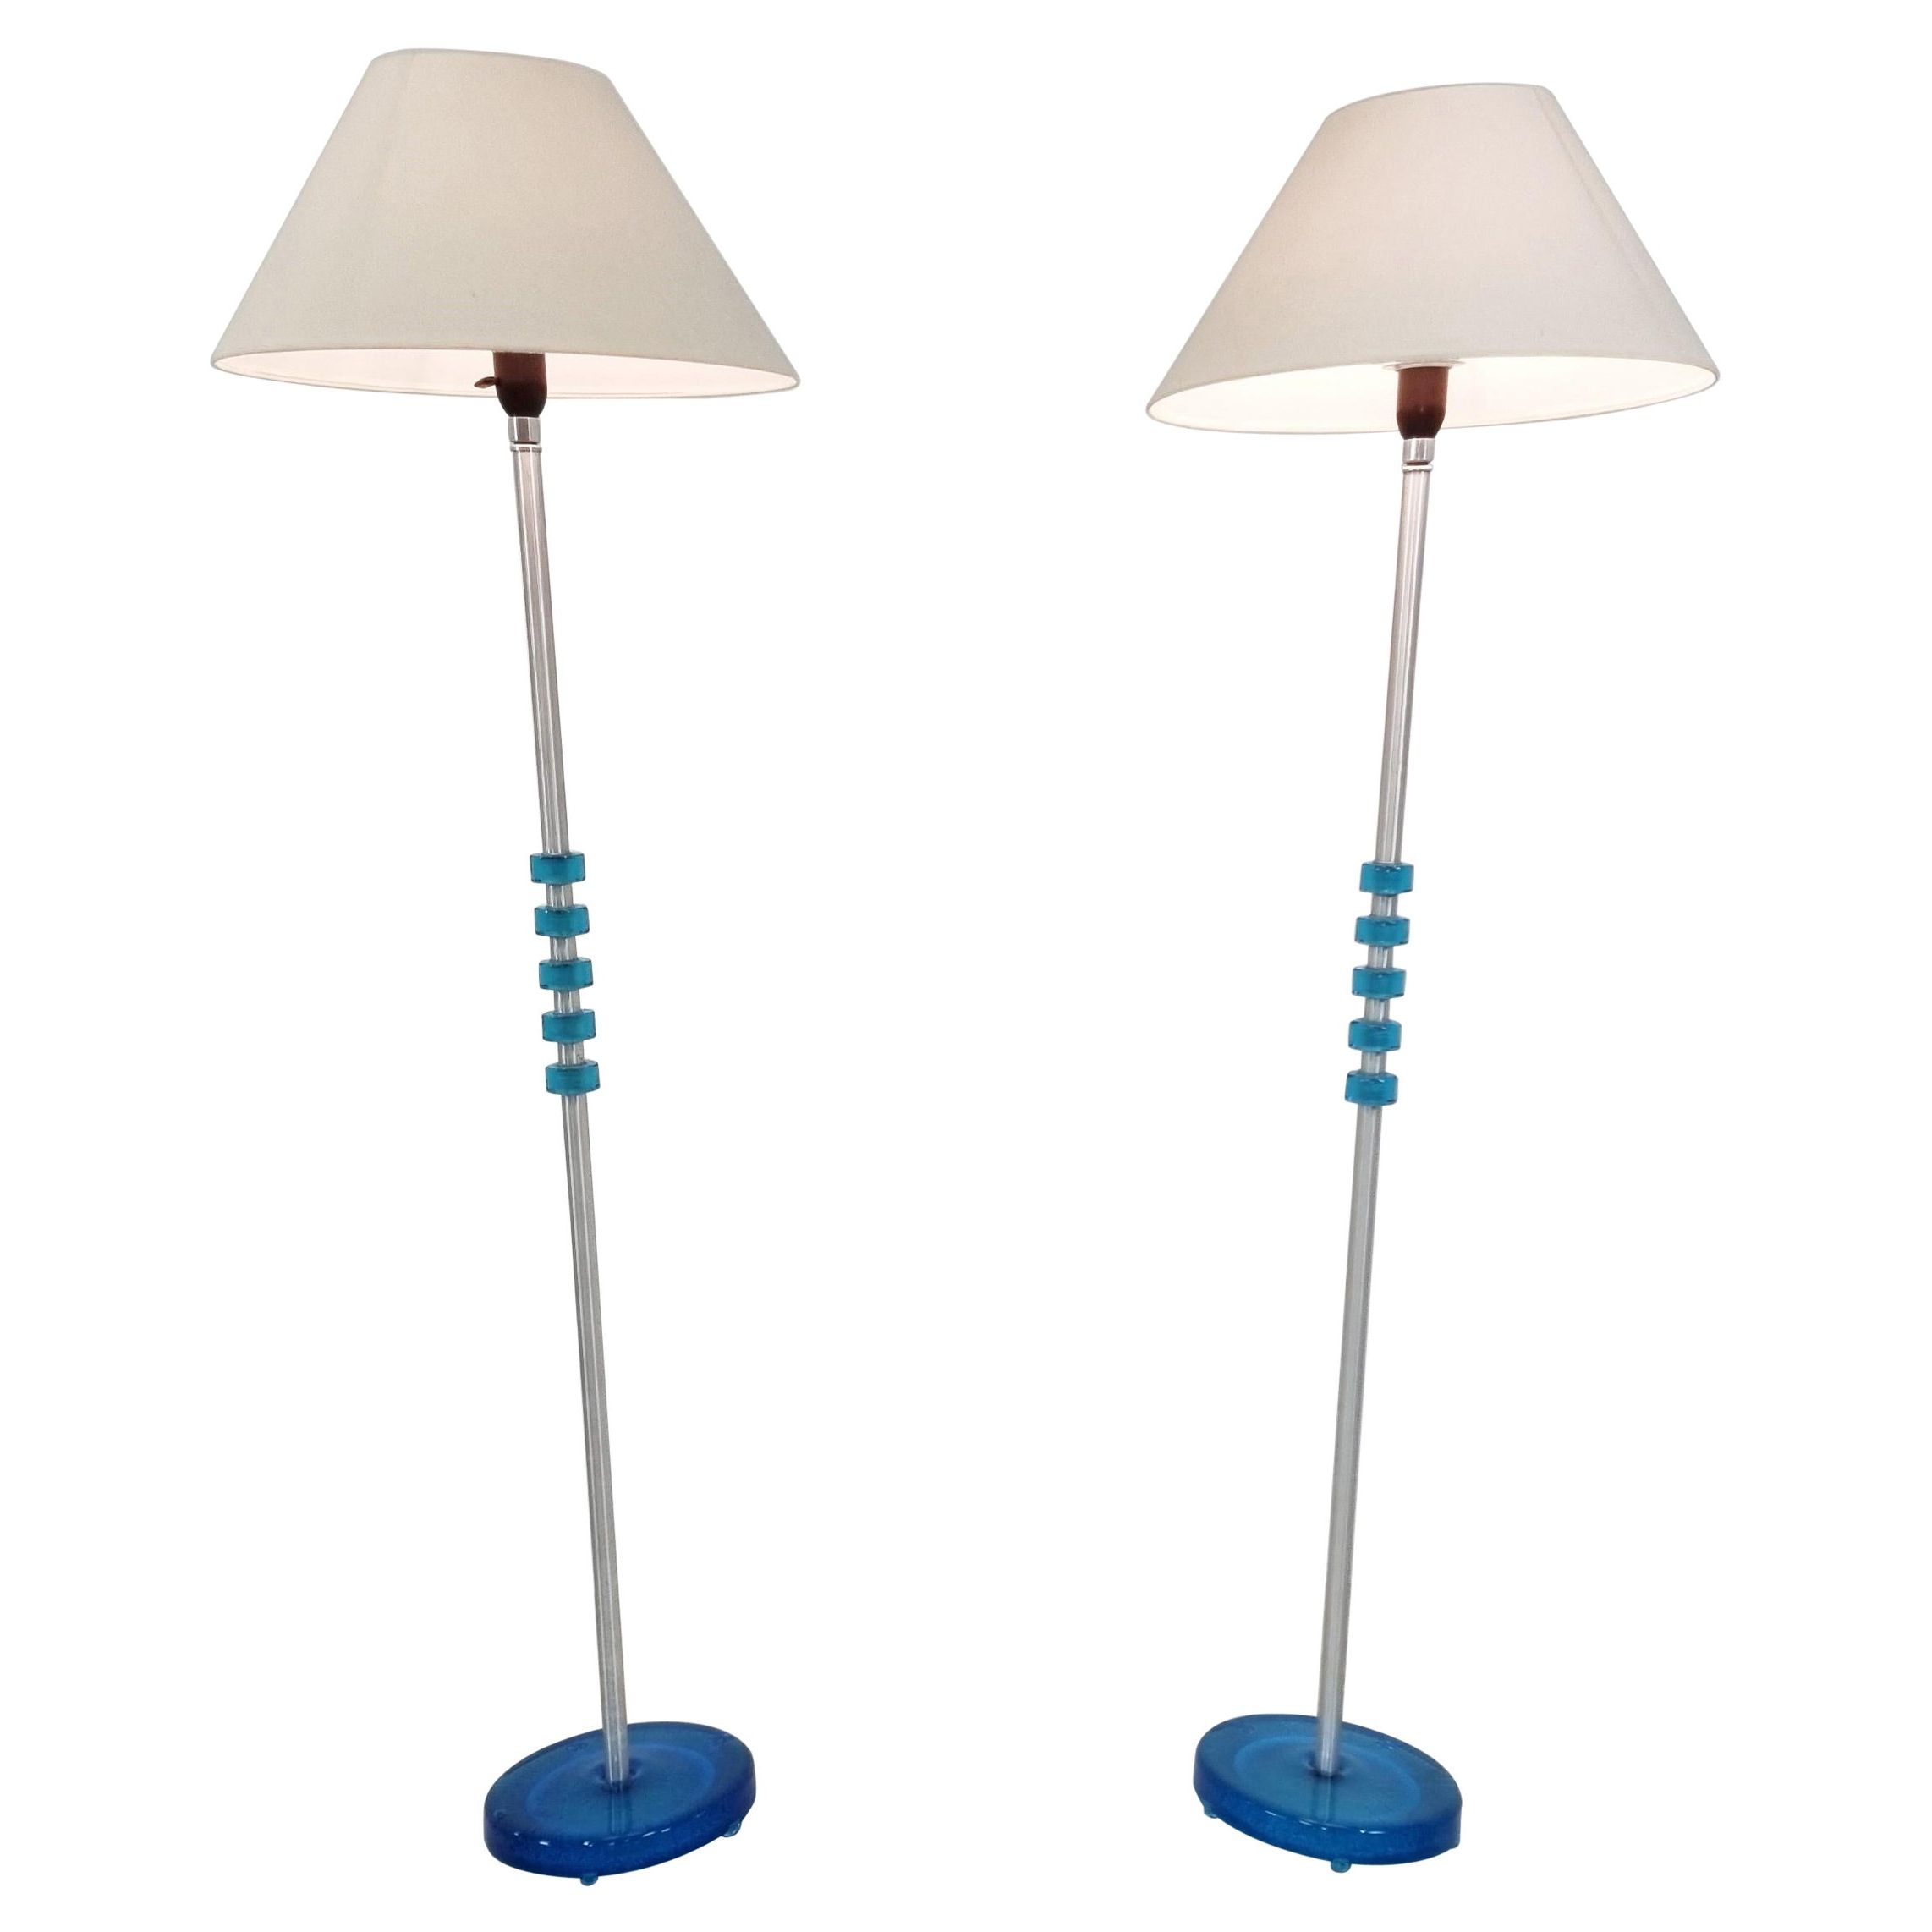 2019 Blue Standing Lamps Intended For Carl Fagerlund Blue Glass Floor Lamps, Set Of 2, 1960s For Sale At 1stdibs (View 11 of 15)